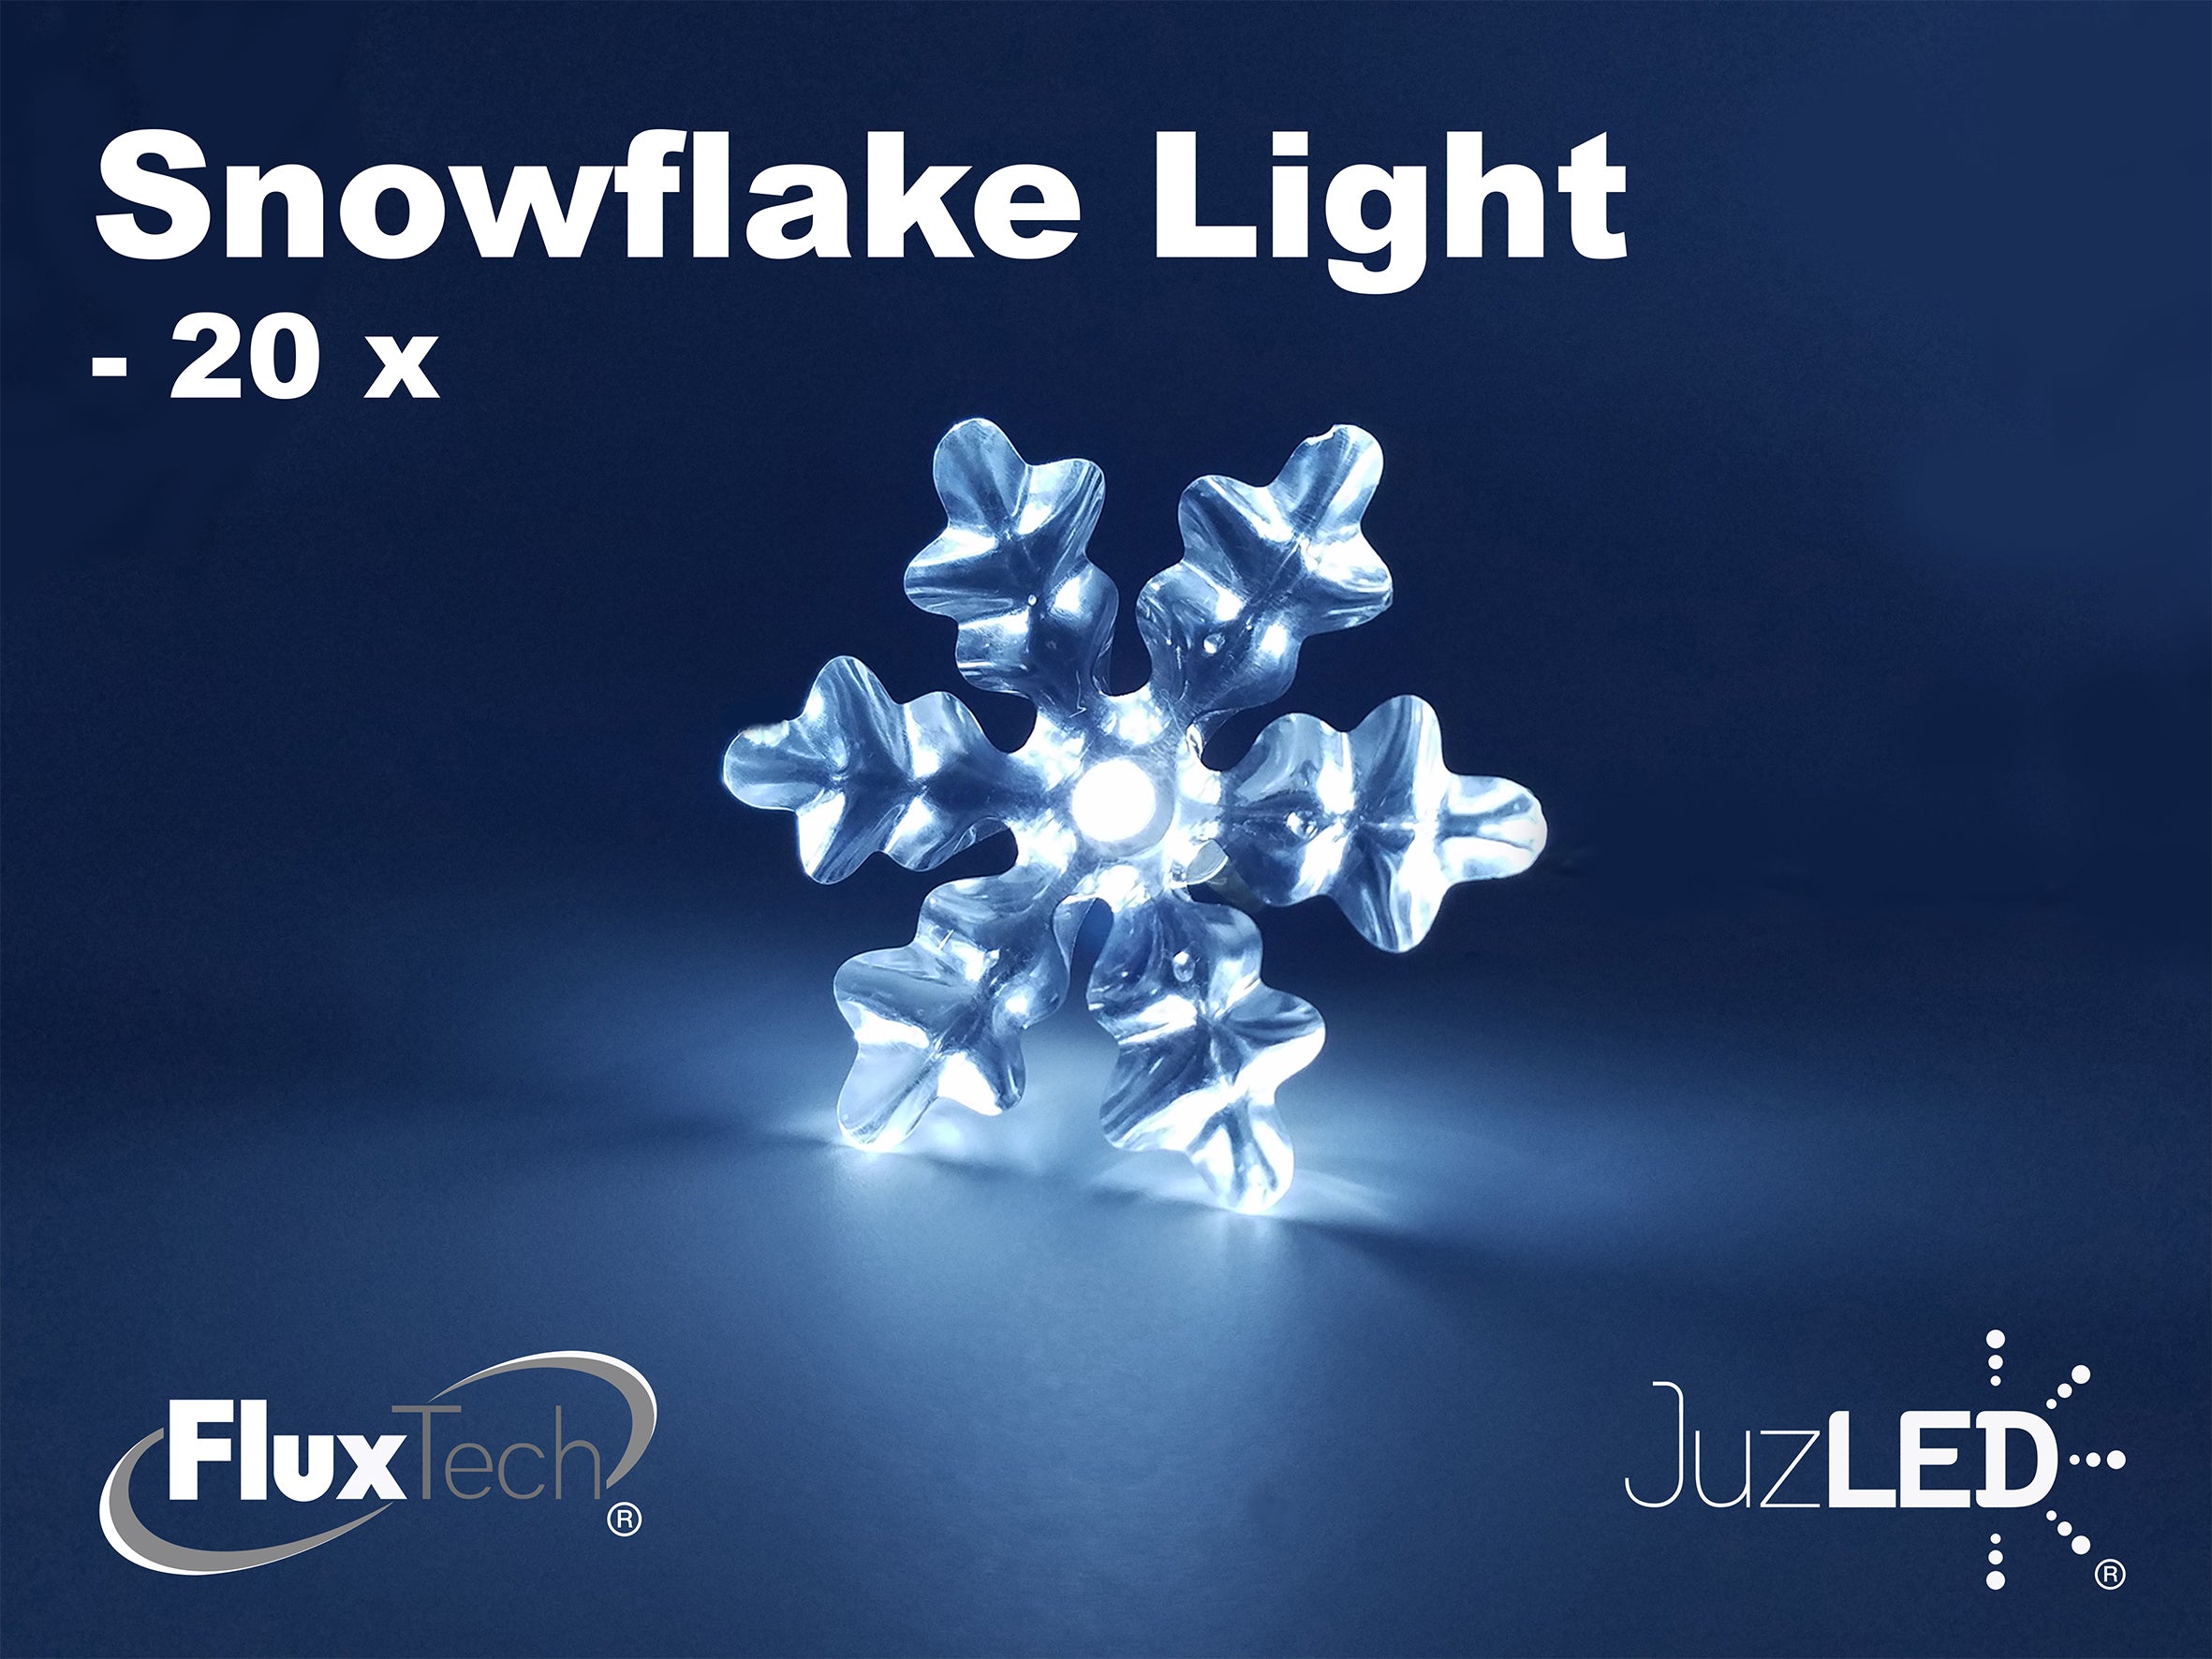 FluxTech - Snowflake x 20 Cool White LED Lights by JustLED – Timer function - Battery Operated